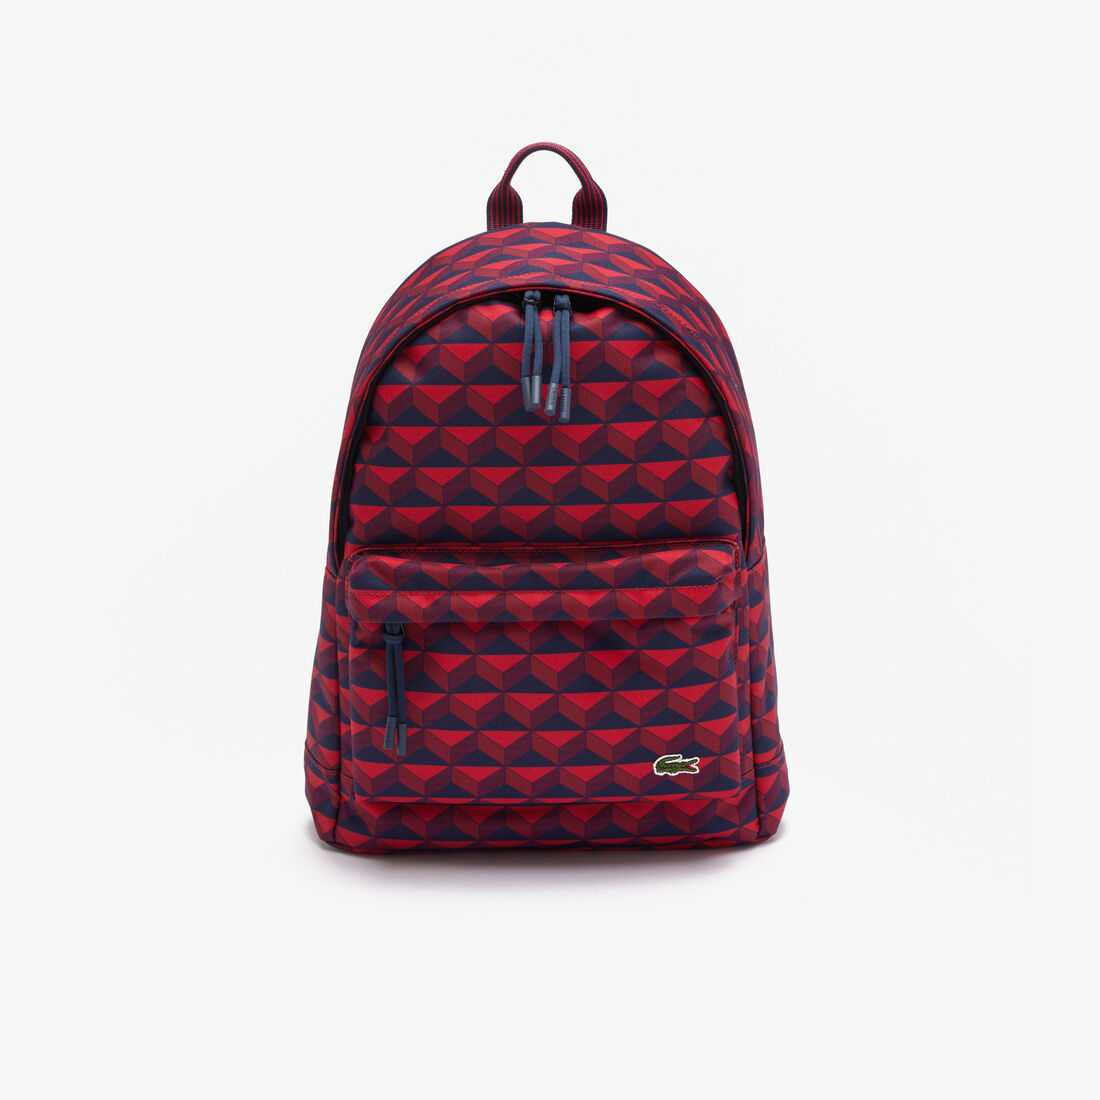 Neocroc Backpack with Laptop Pocket - NH4609NZ-N39